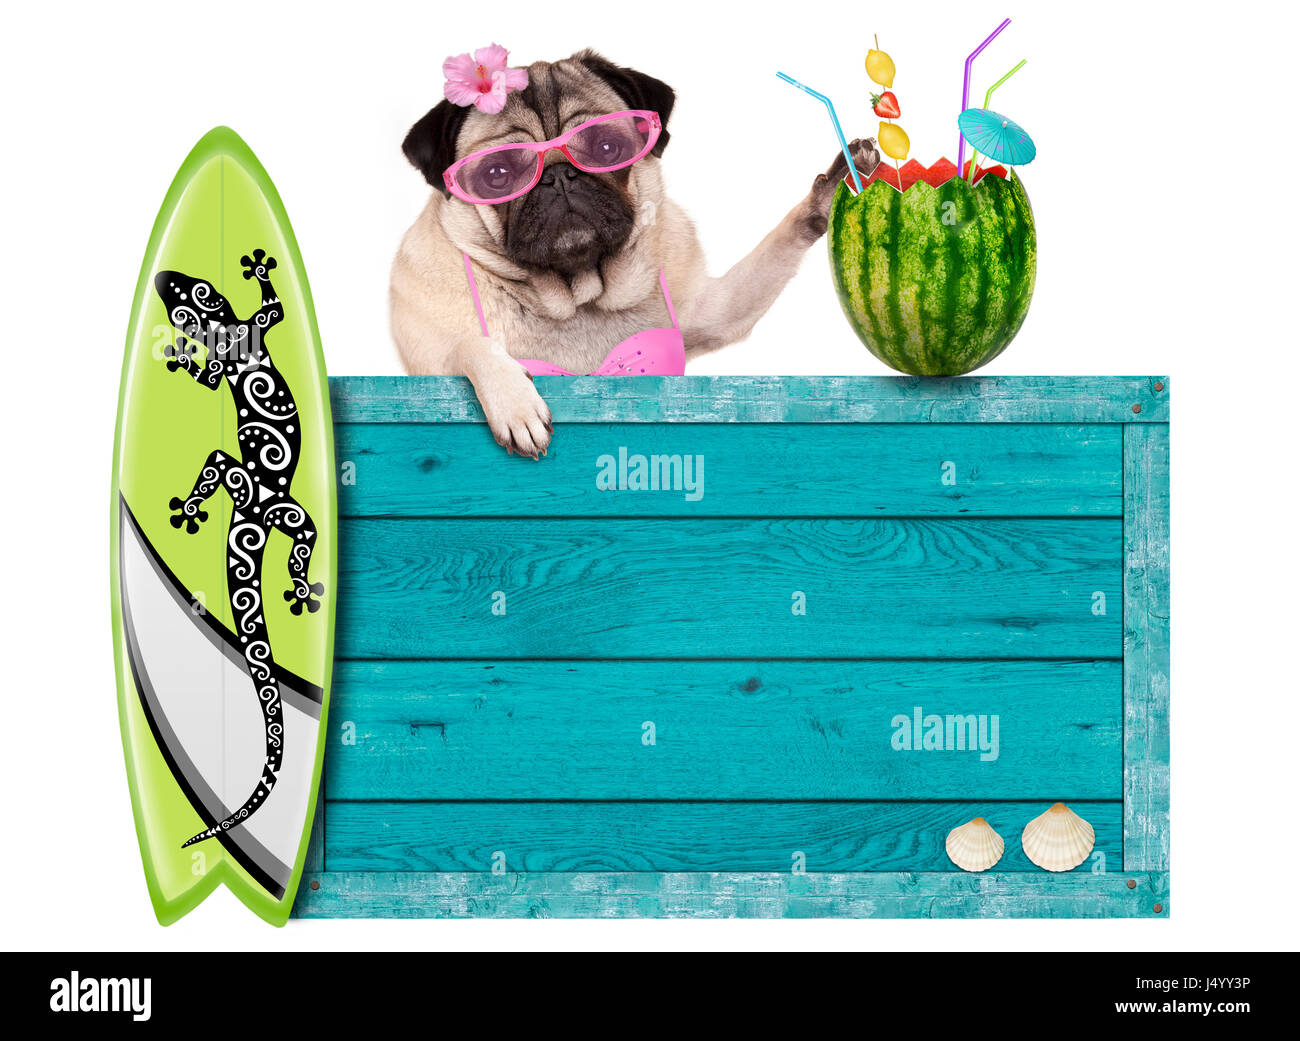 bikini babe pug dog with blue vintage wooden beach sign, surfboard and  summer watermelon cocktail, isolated on white background Stock Photo - Alamy